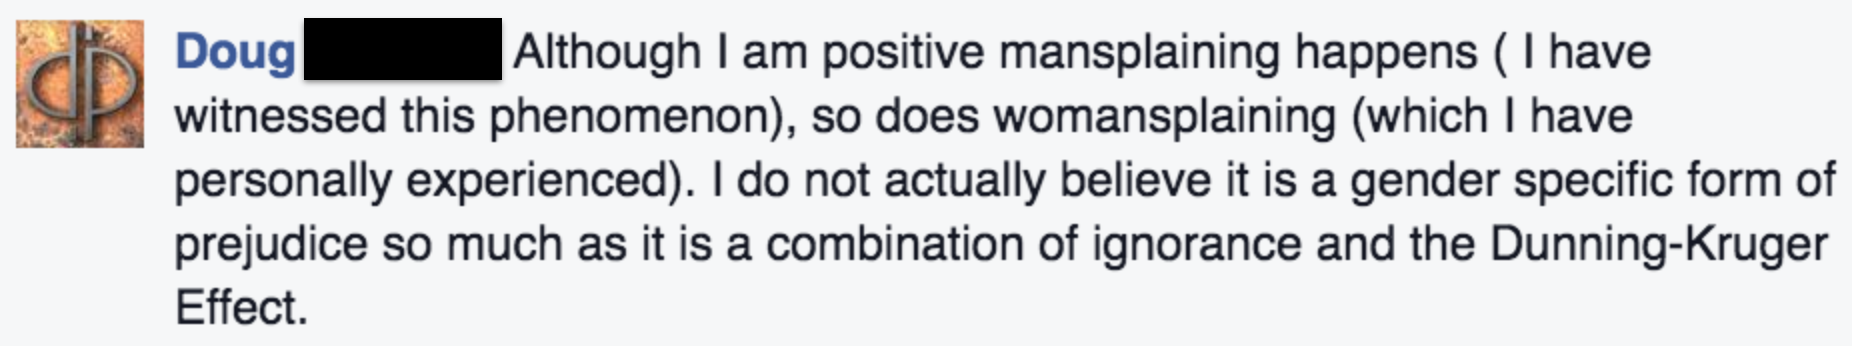 Doug: Although I am positive mansplaining happens ( I have witnessed this phenomenon), so does womansplaining (which I have personally experienced). I do not actually believe it is a gender specific form of prejudice so much as it is a combination of ignorance and the Dunning-Kruger Effect.